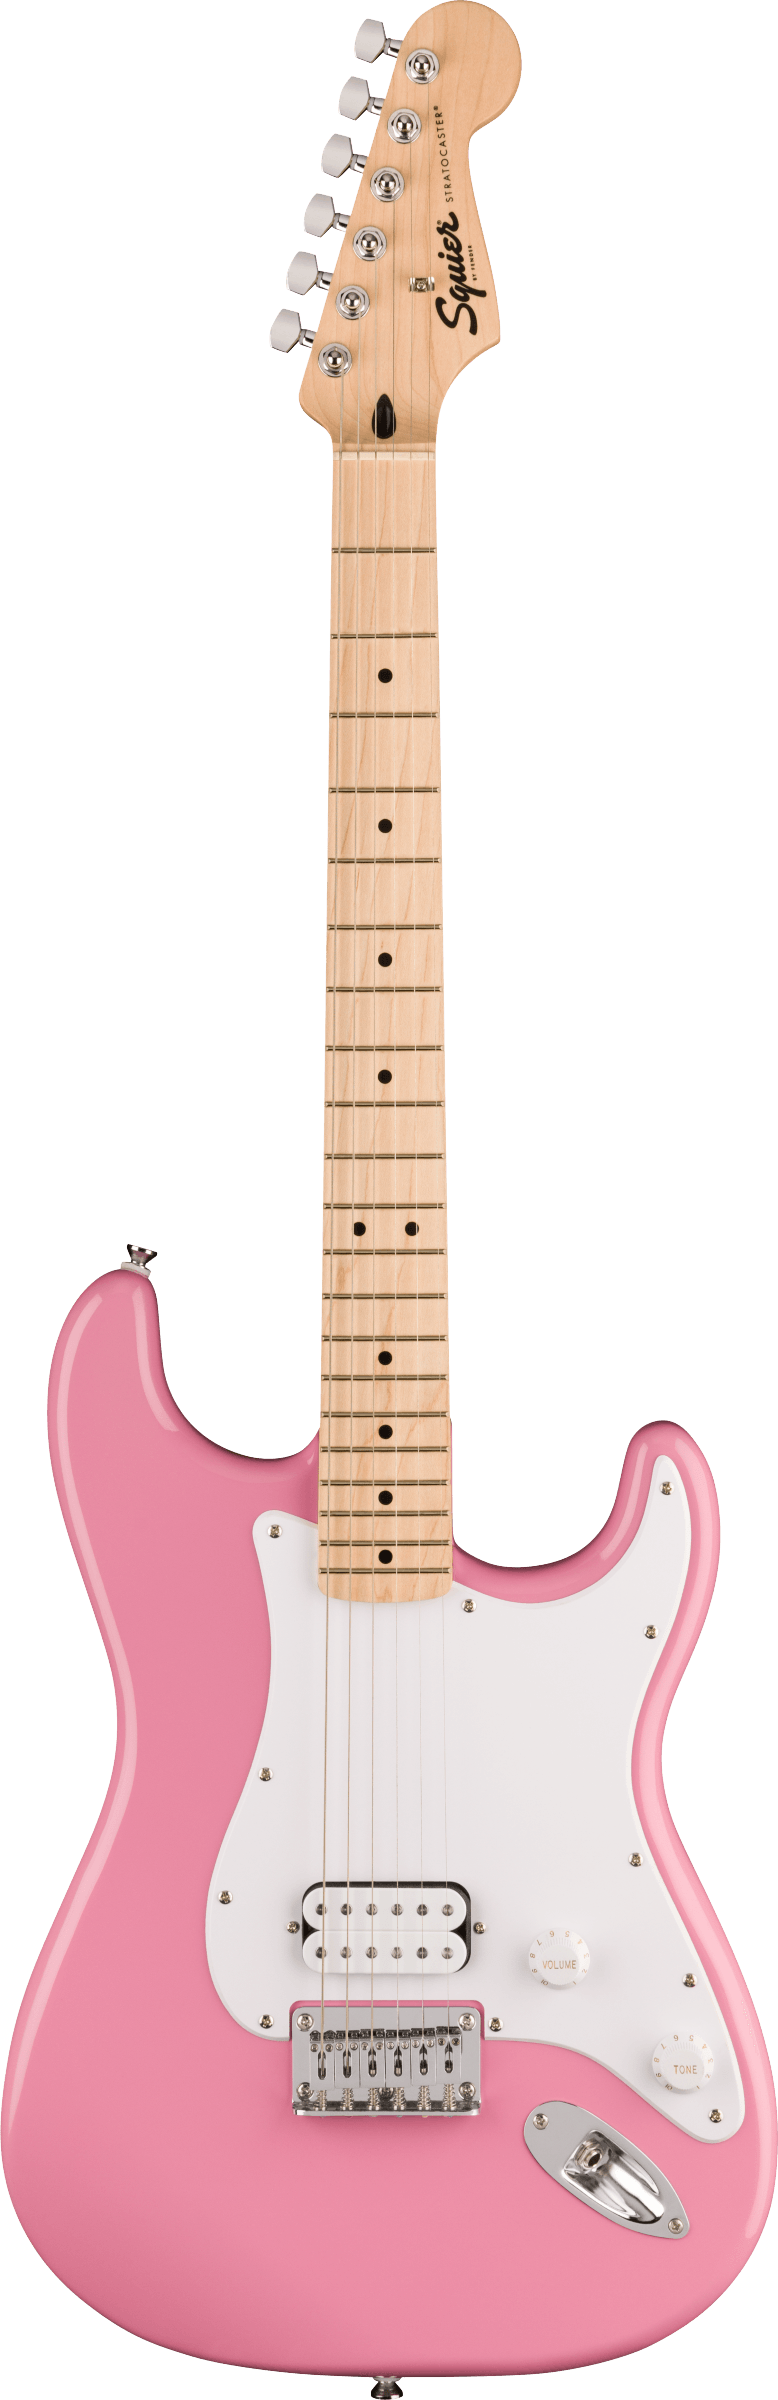 Squier Sonic Stratocaster Hard Tail H Pink - White Pickguard